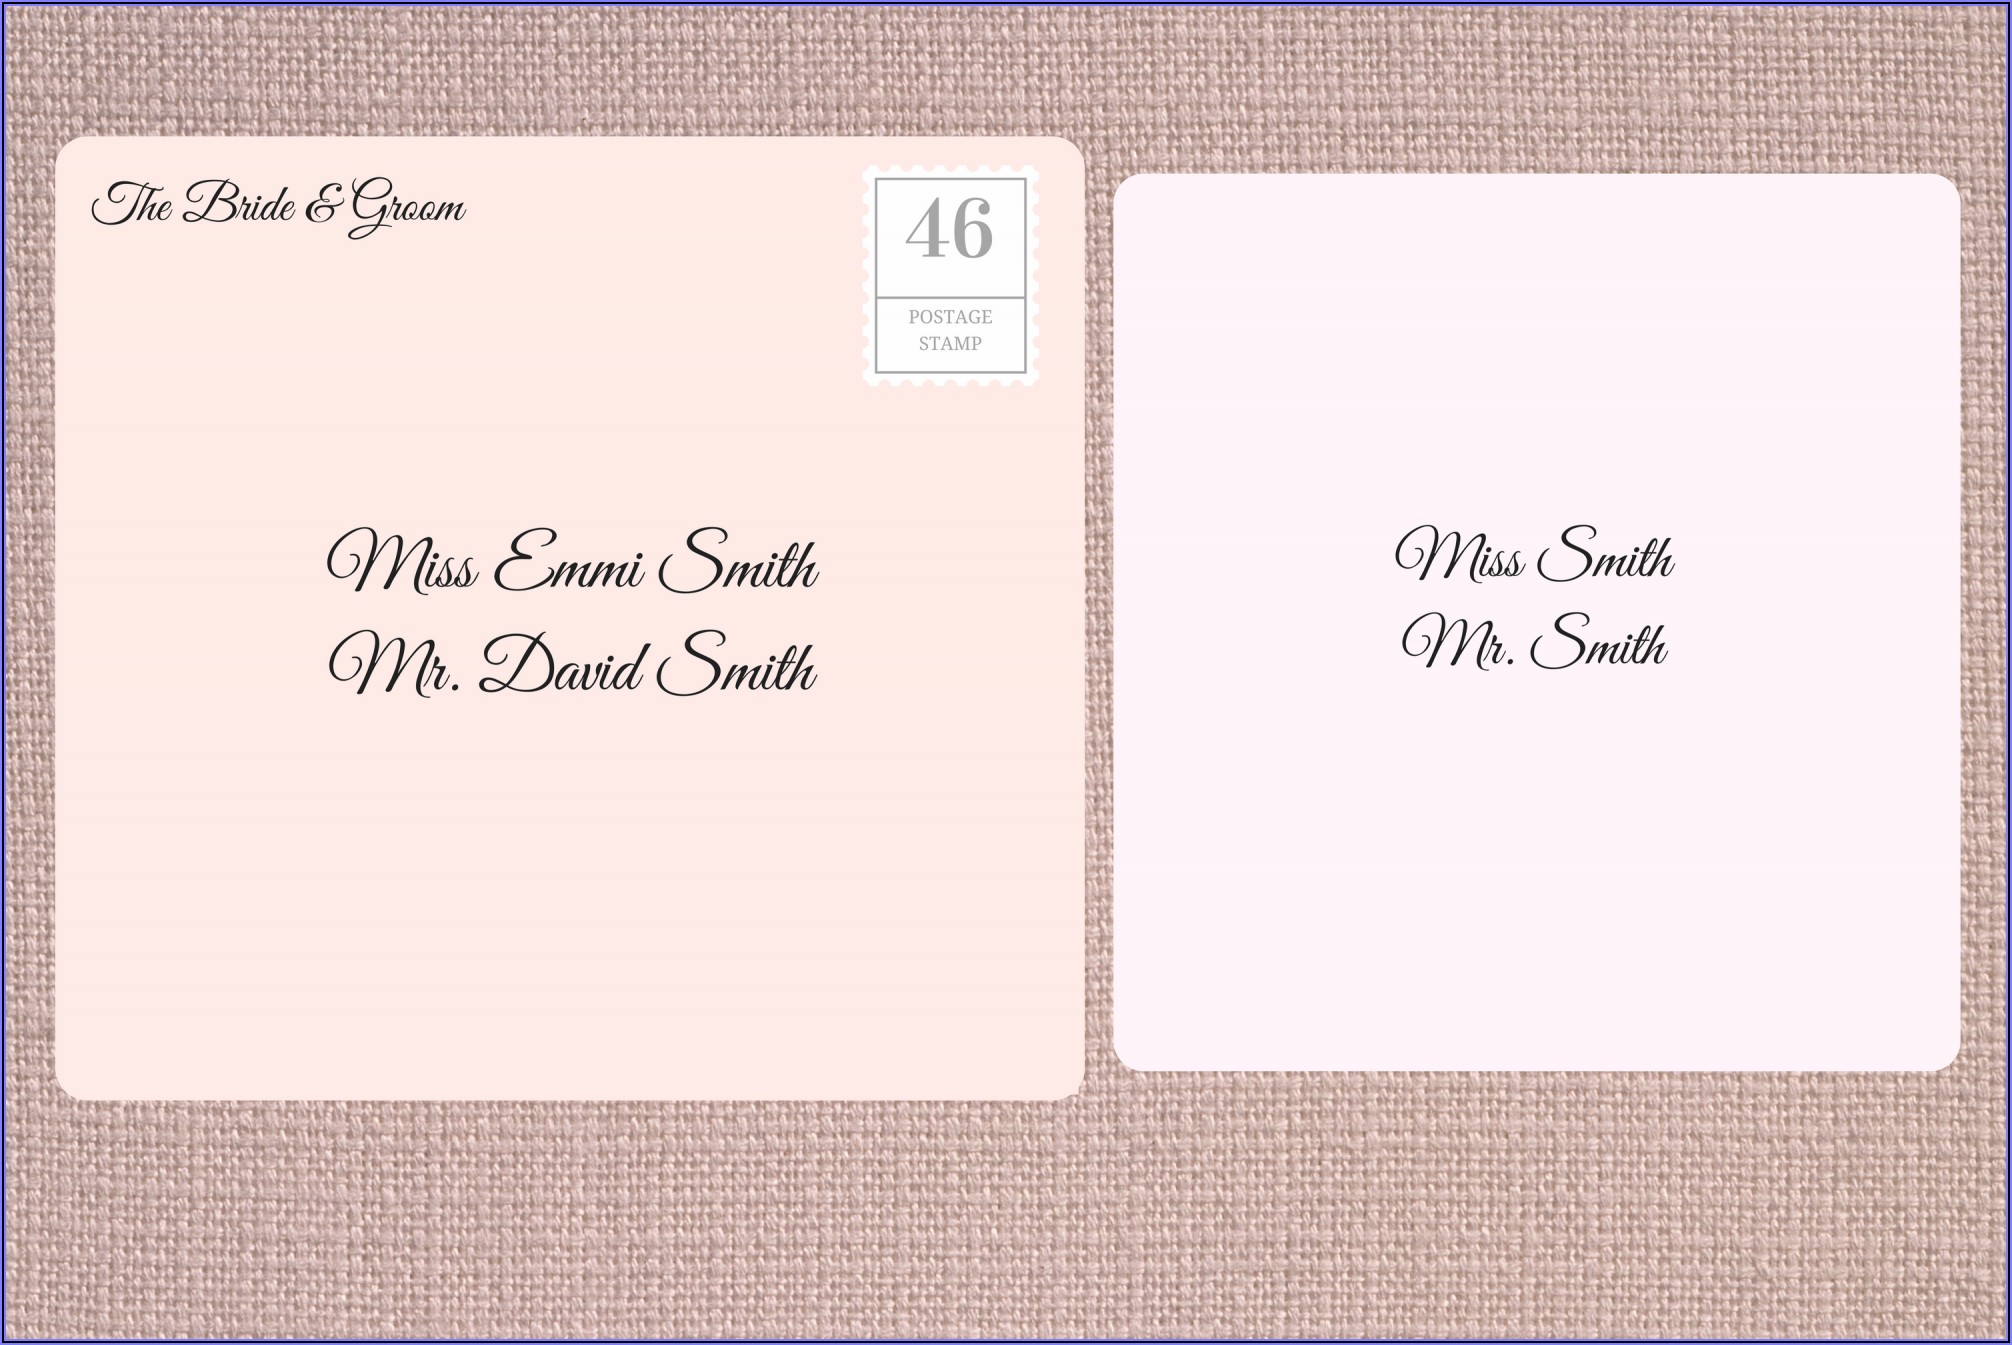 Addressing Wedding Invitations To A Family With No Inner Envelope